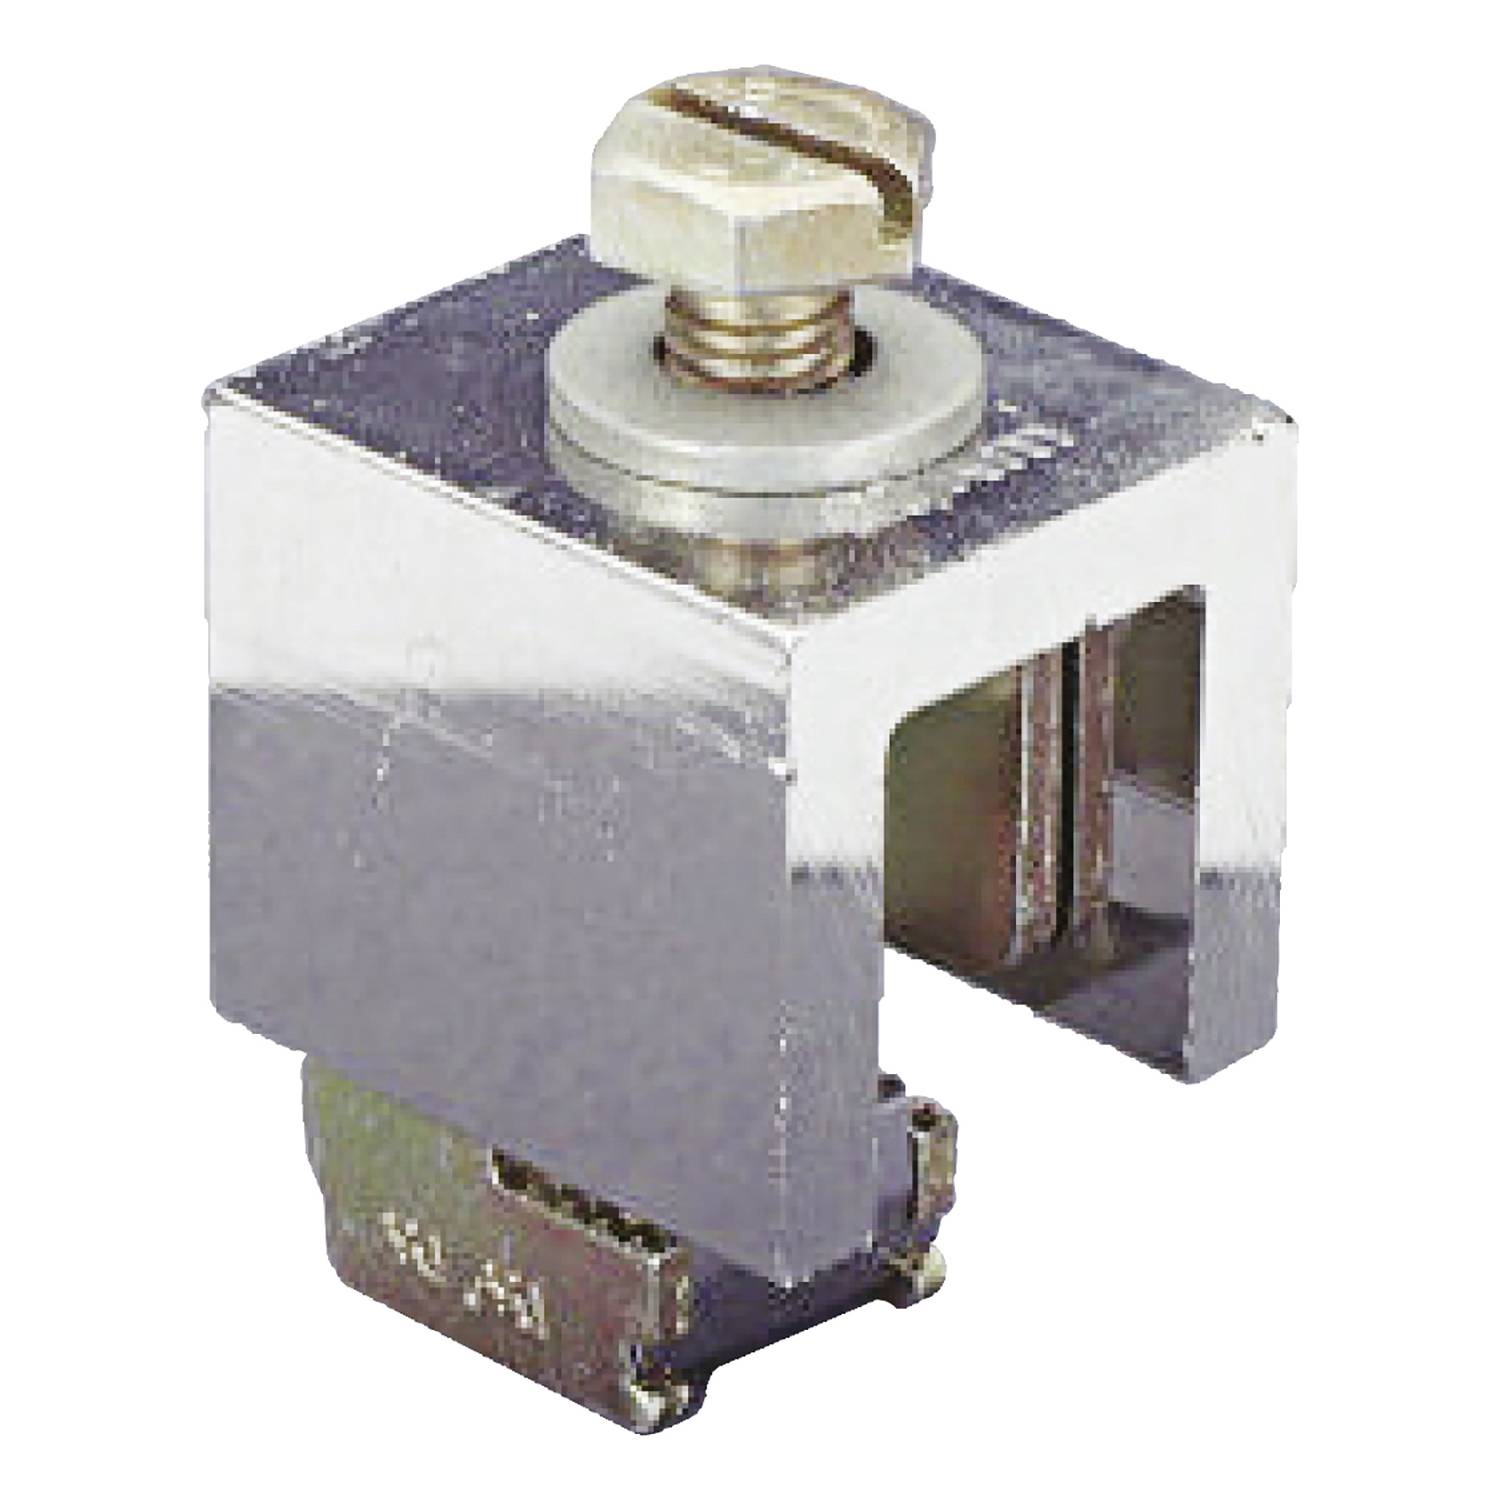 Siemens 8US1941-2AC00 Terminal Lug With M10 Stud Bolt, 40 deg C, For Use With 10 mm T and Double T-Profile Busbar System